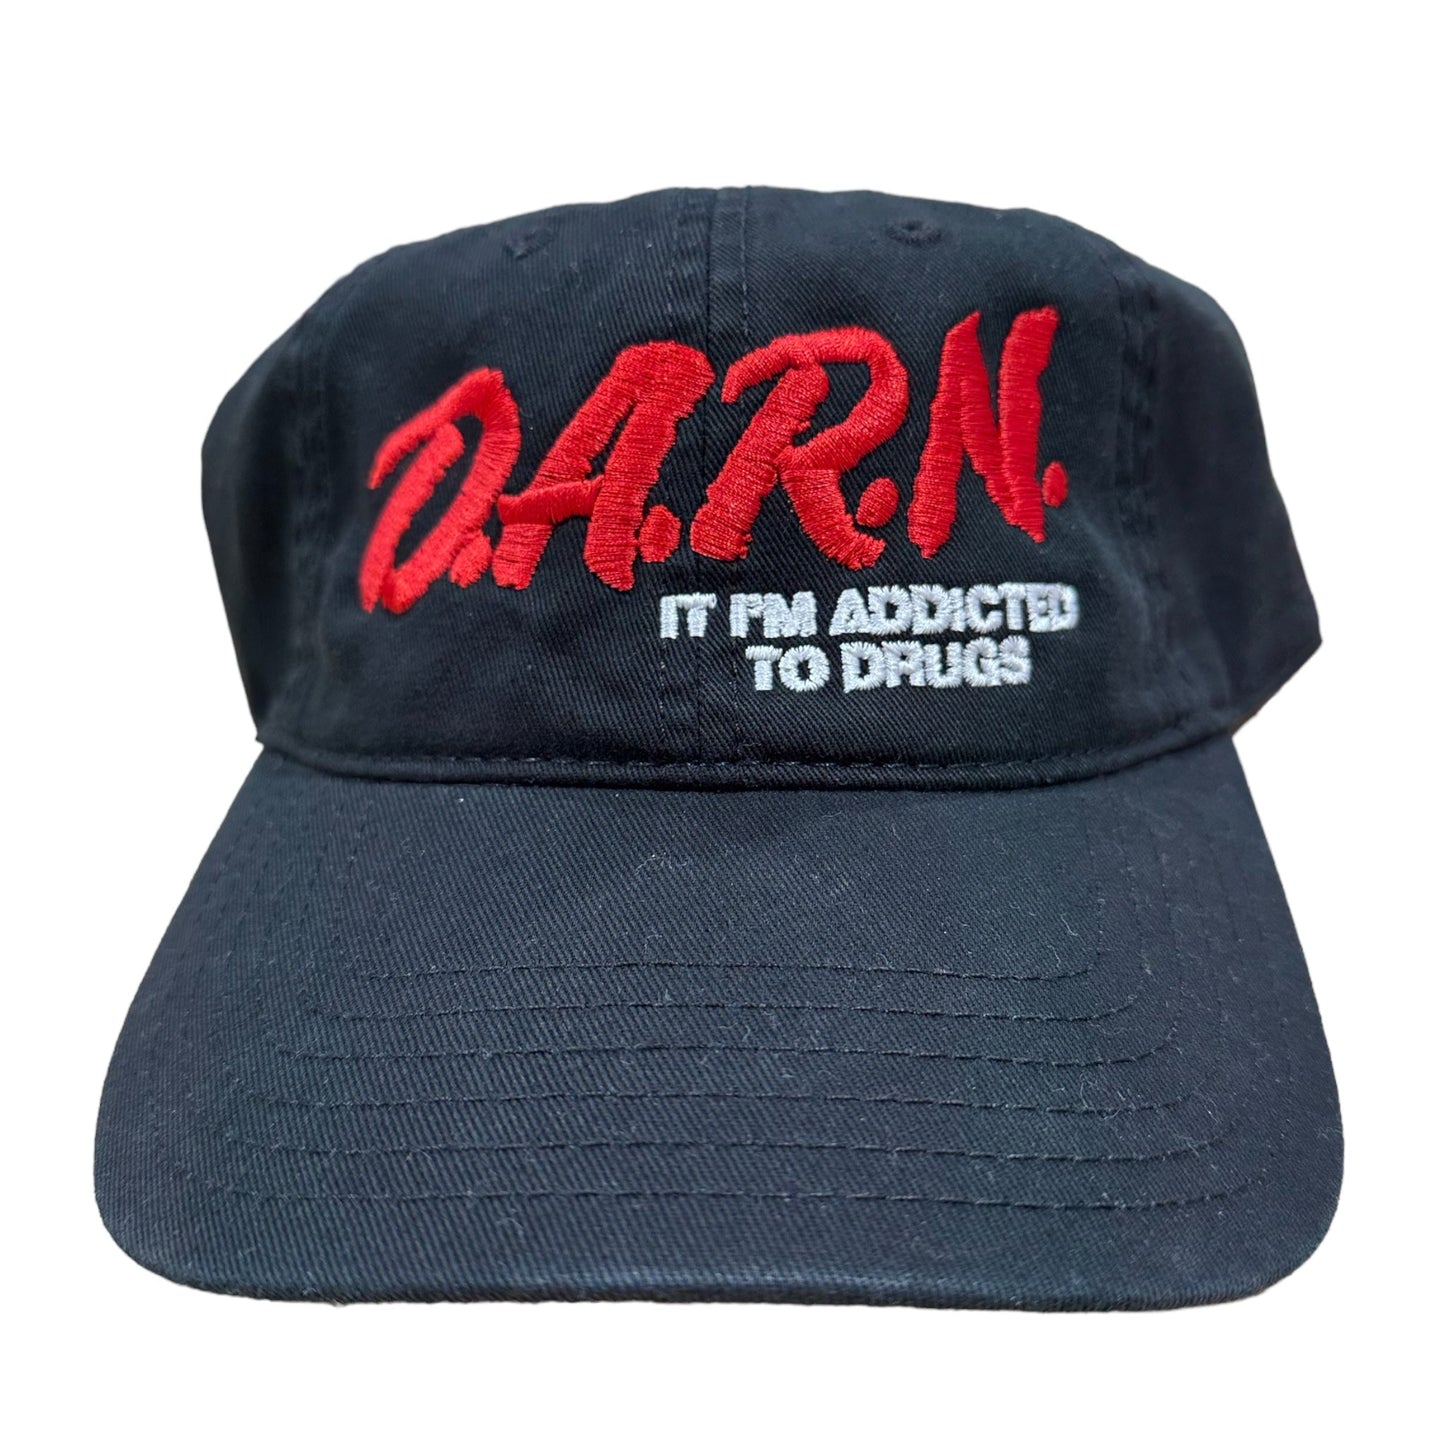 Darn It I'm Addicted to Drugs Hat.